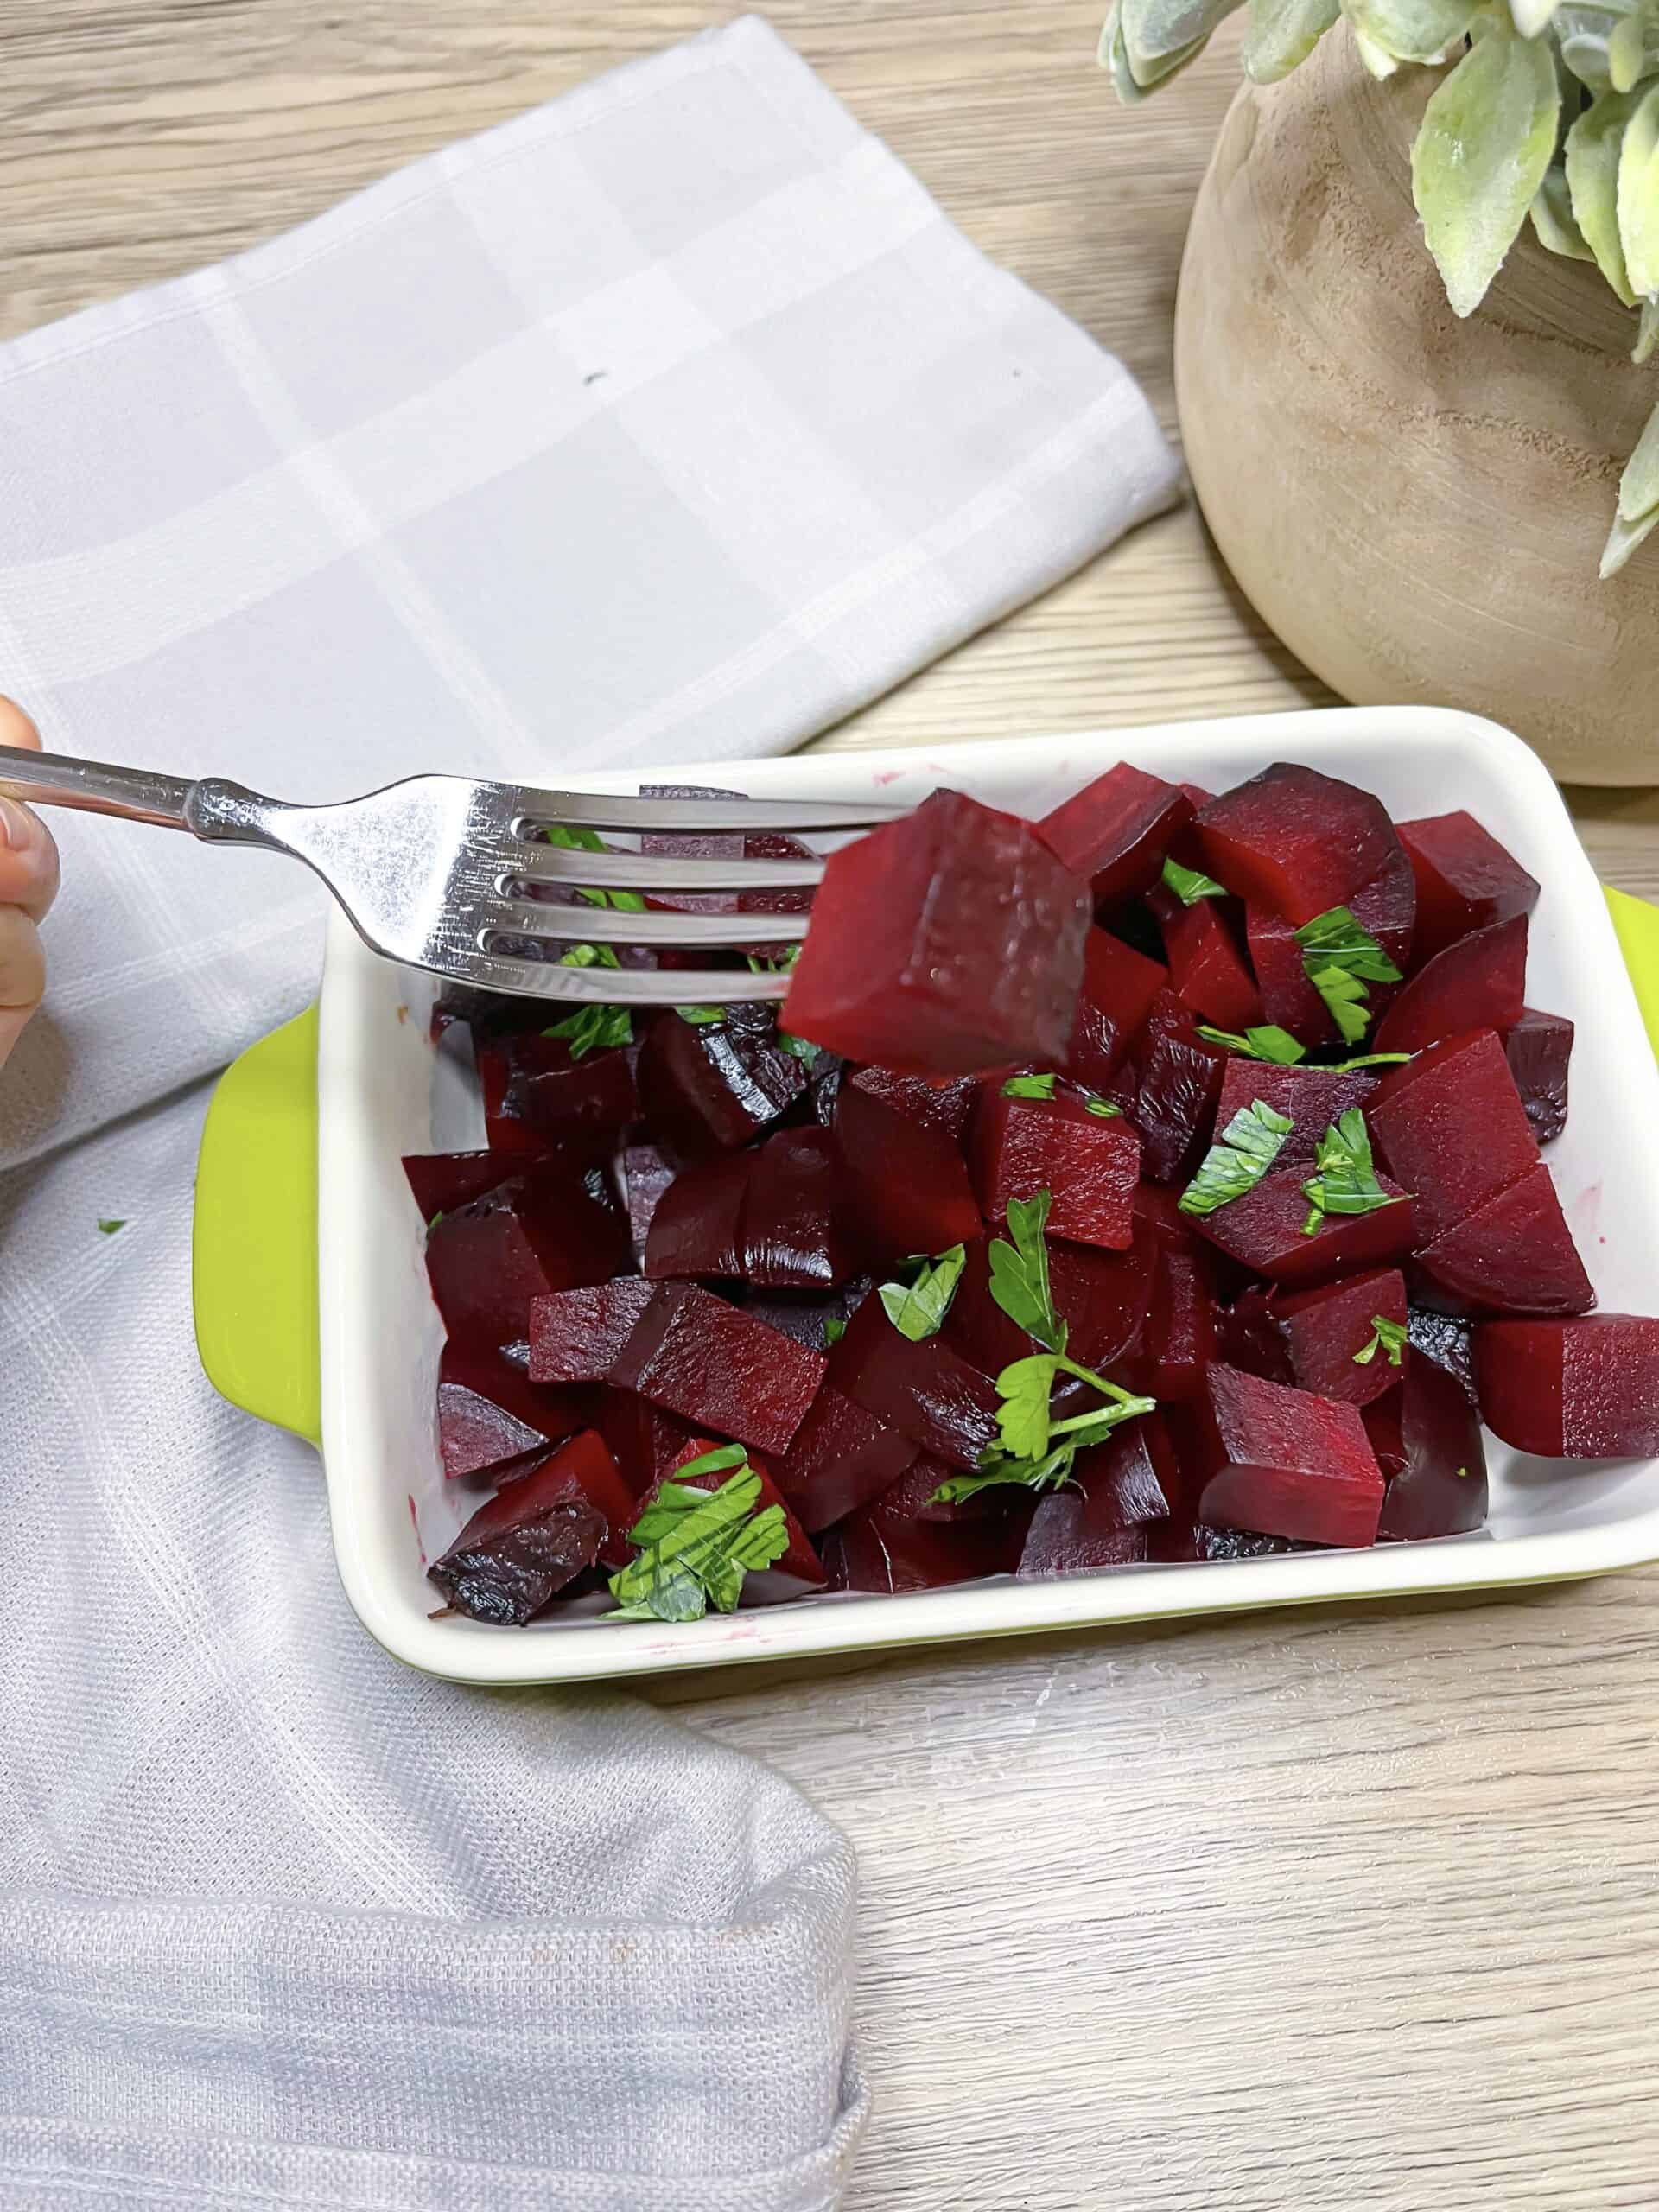 Roasted beets in foil diced with some parsley on top and a hand holding a fork that is piercing a beet with a gray dish cloth and green plant in the background